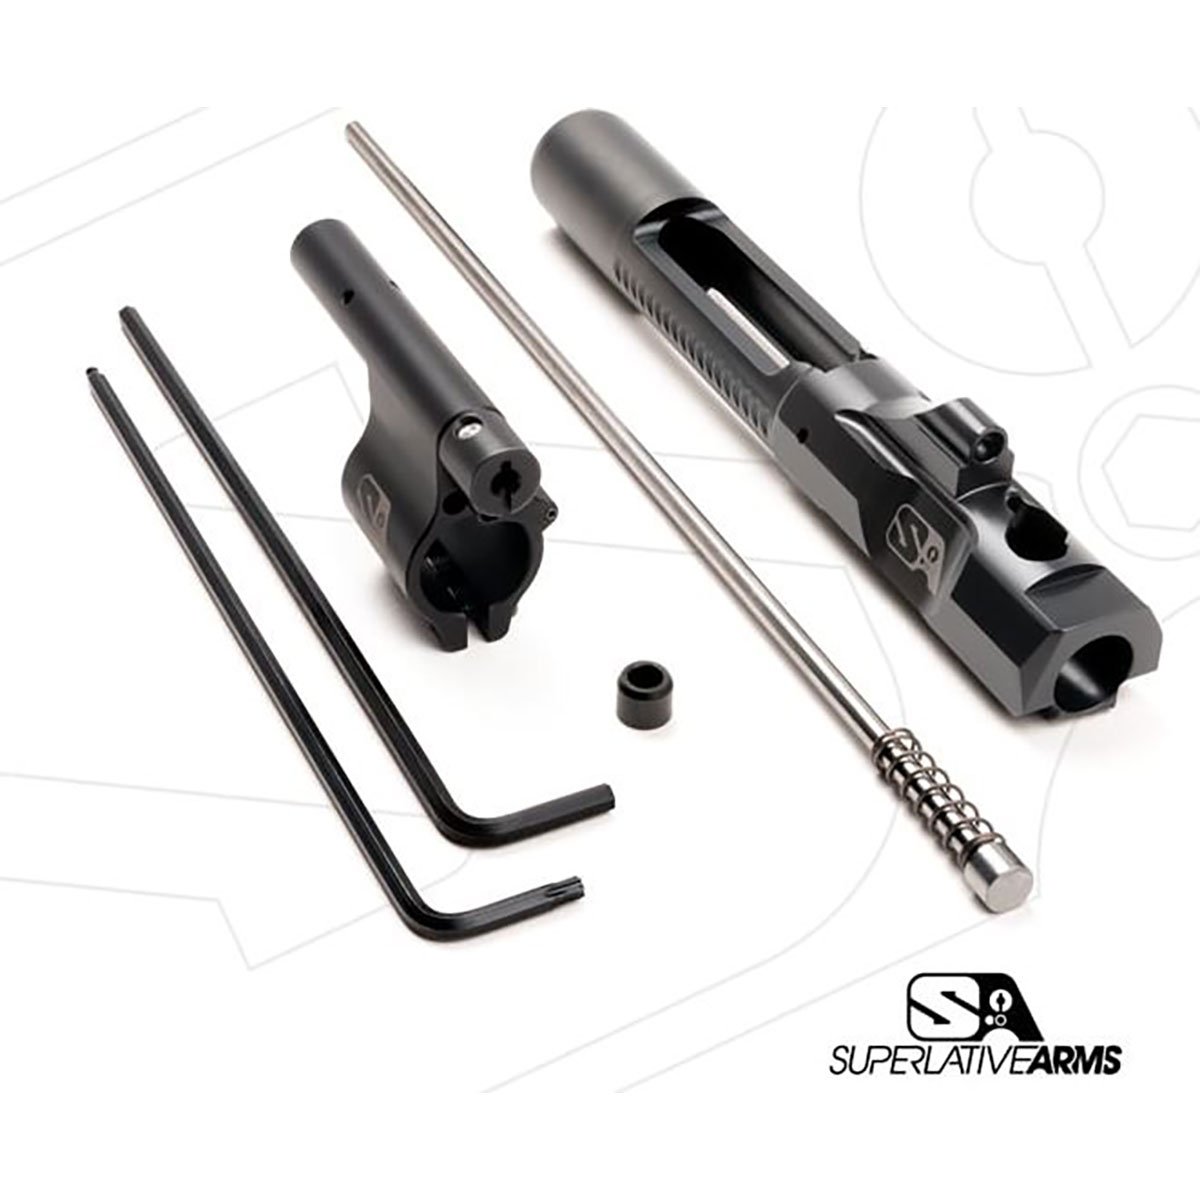 SUPERLATIVE ARMS LLC - AR-15 ADJUSTABLE PISTON SYSTEM WITH CLAMP ON 0.625" GAS BLOCK